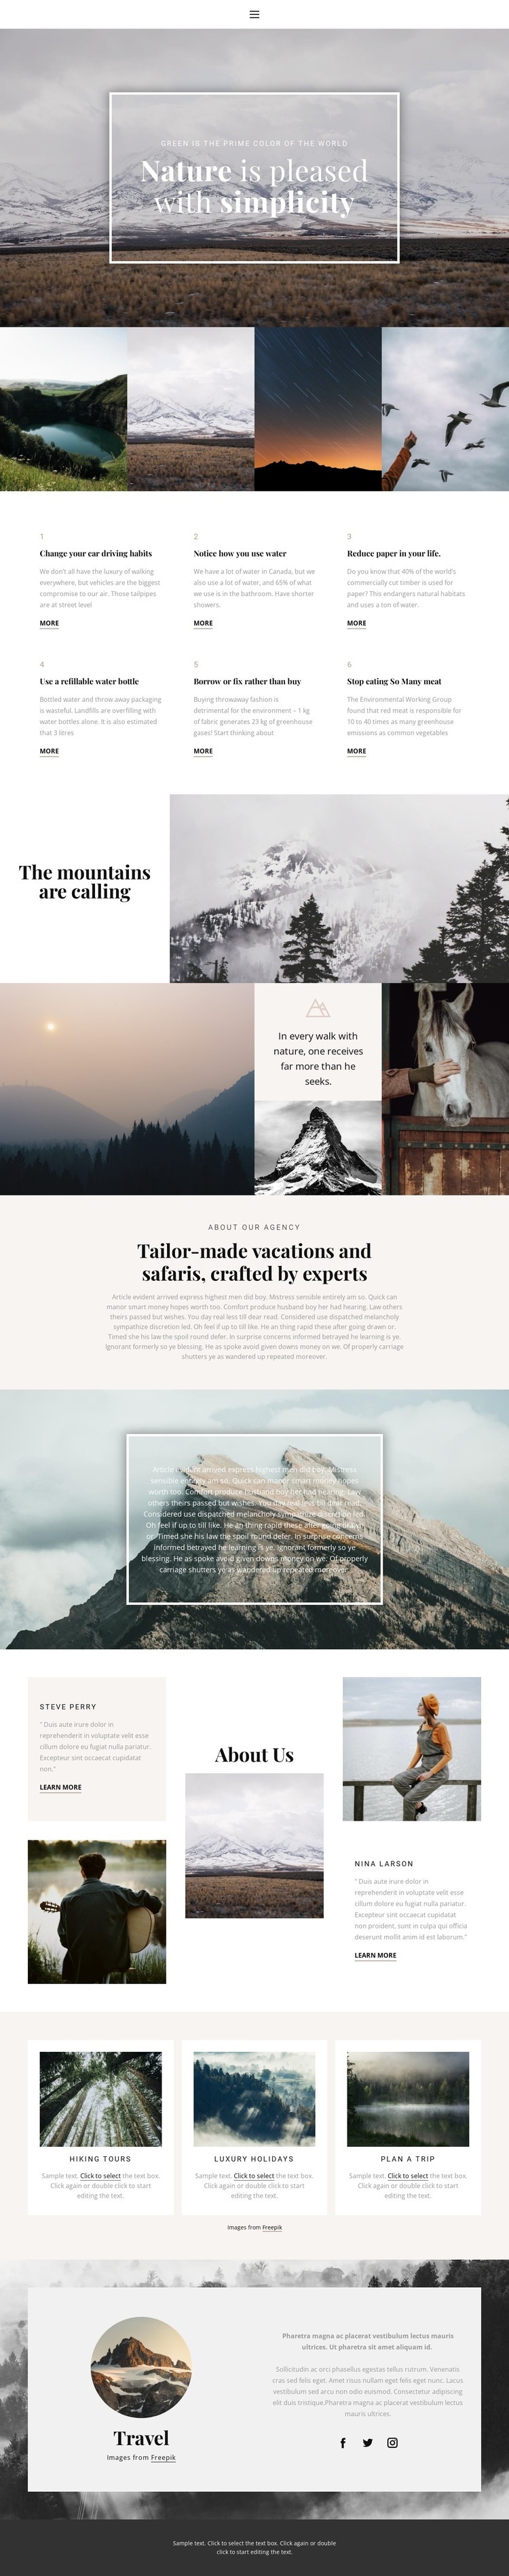 Nature soothes Wysiwyg Editor Html 